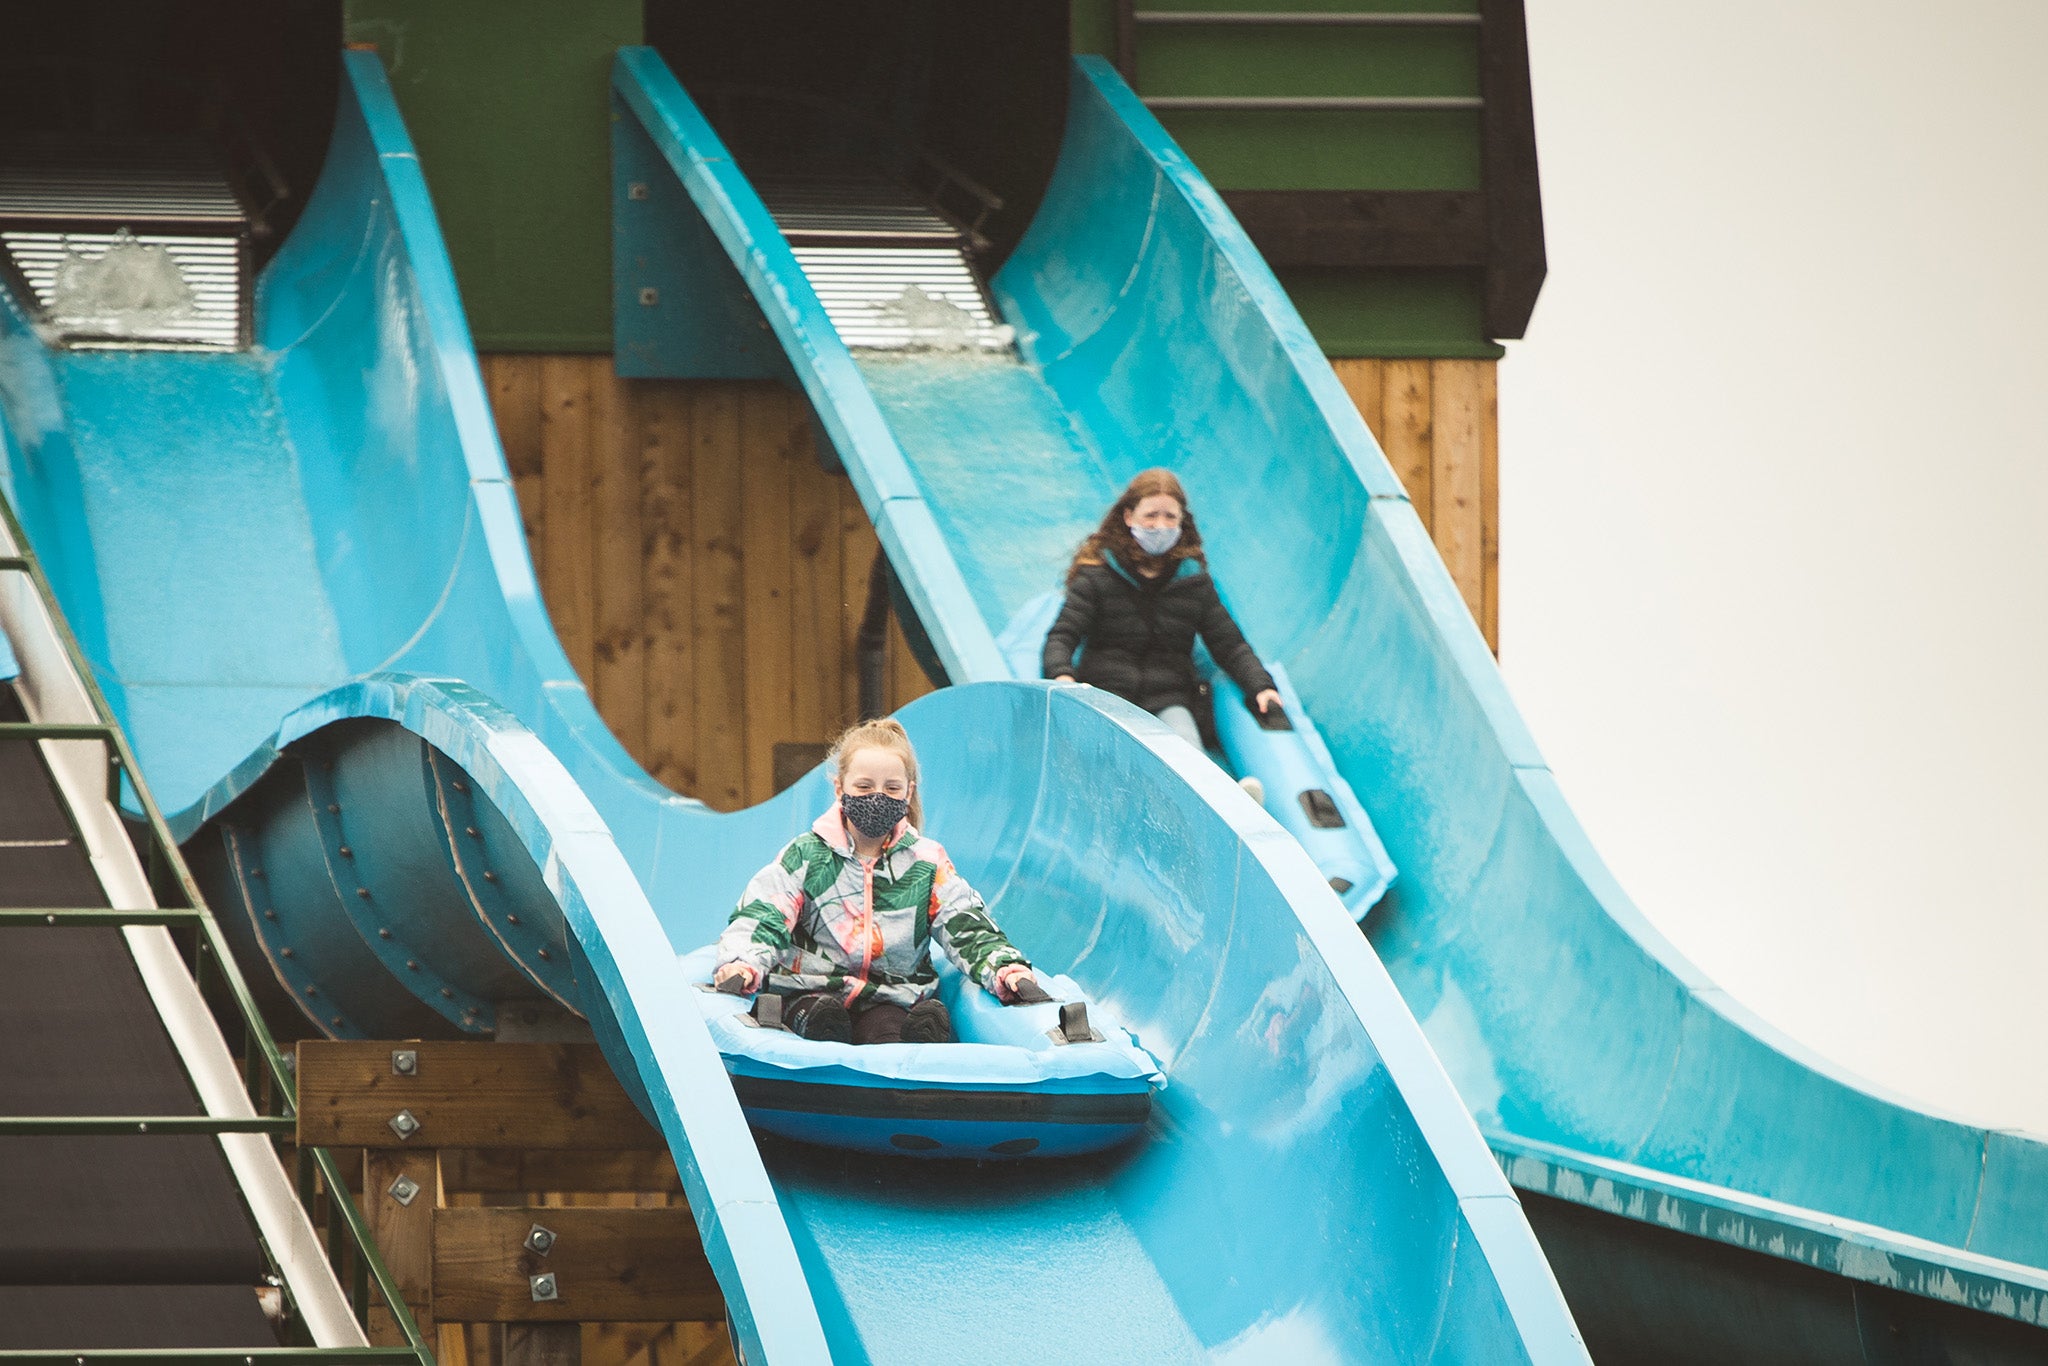 Slide fun at the newly opened park